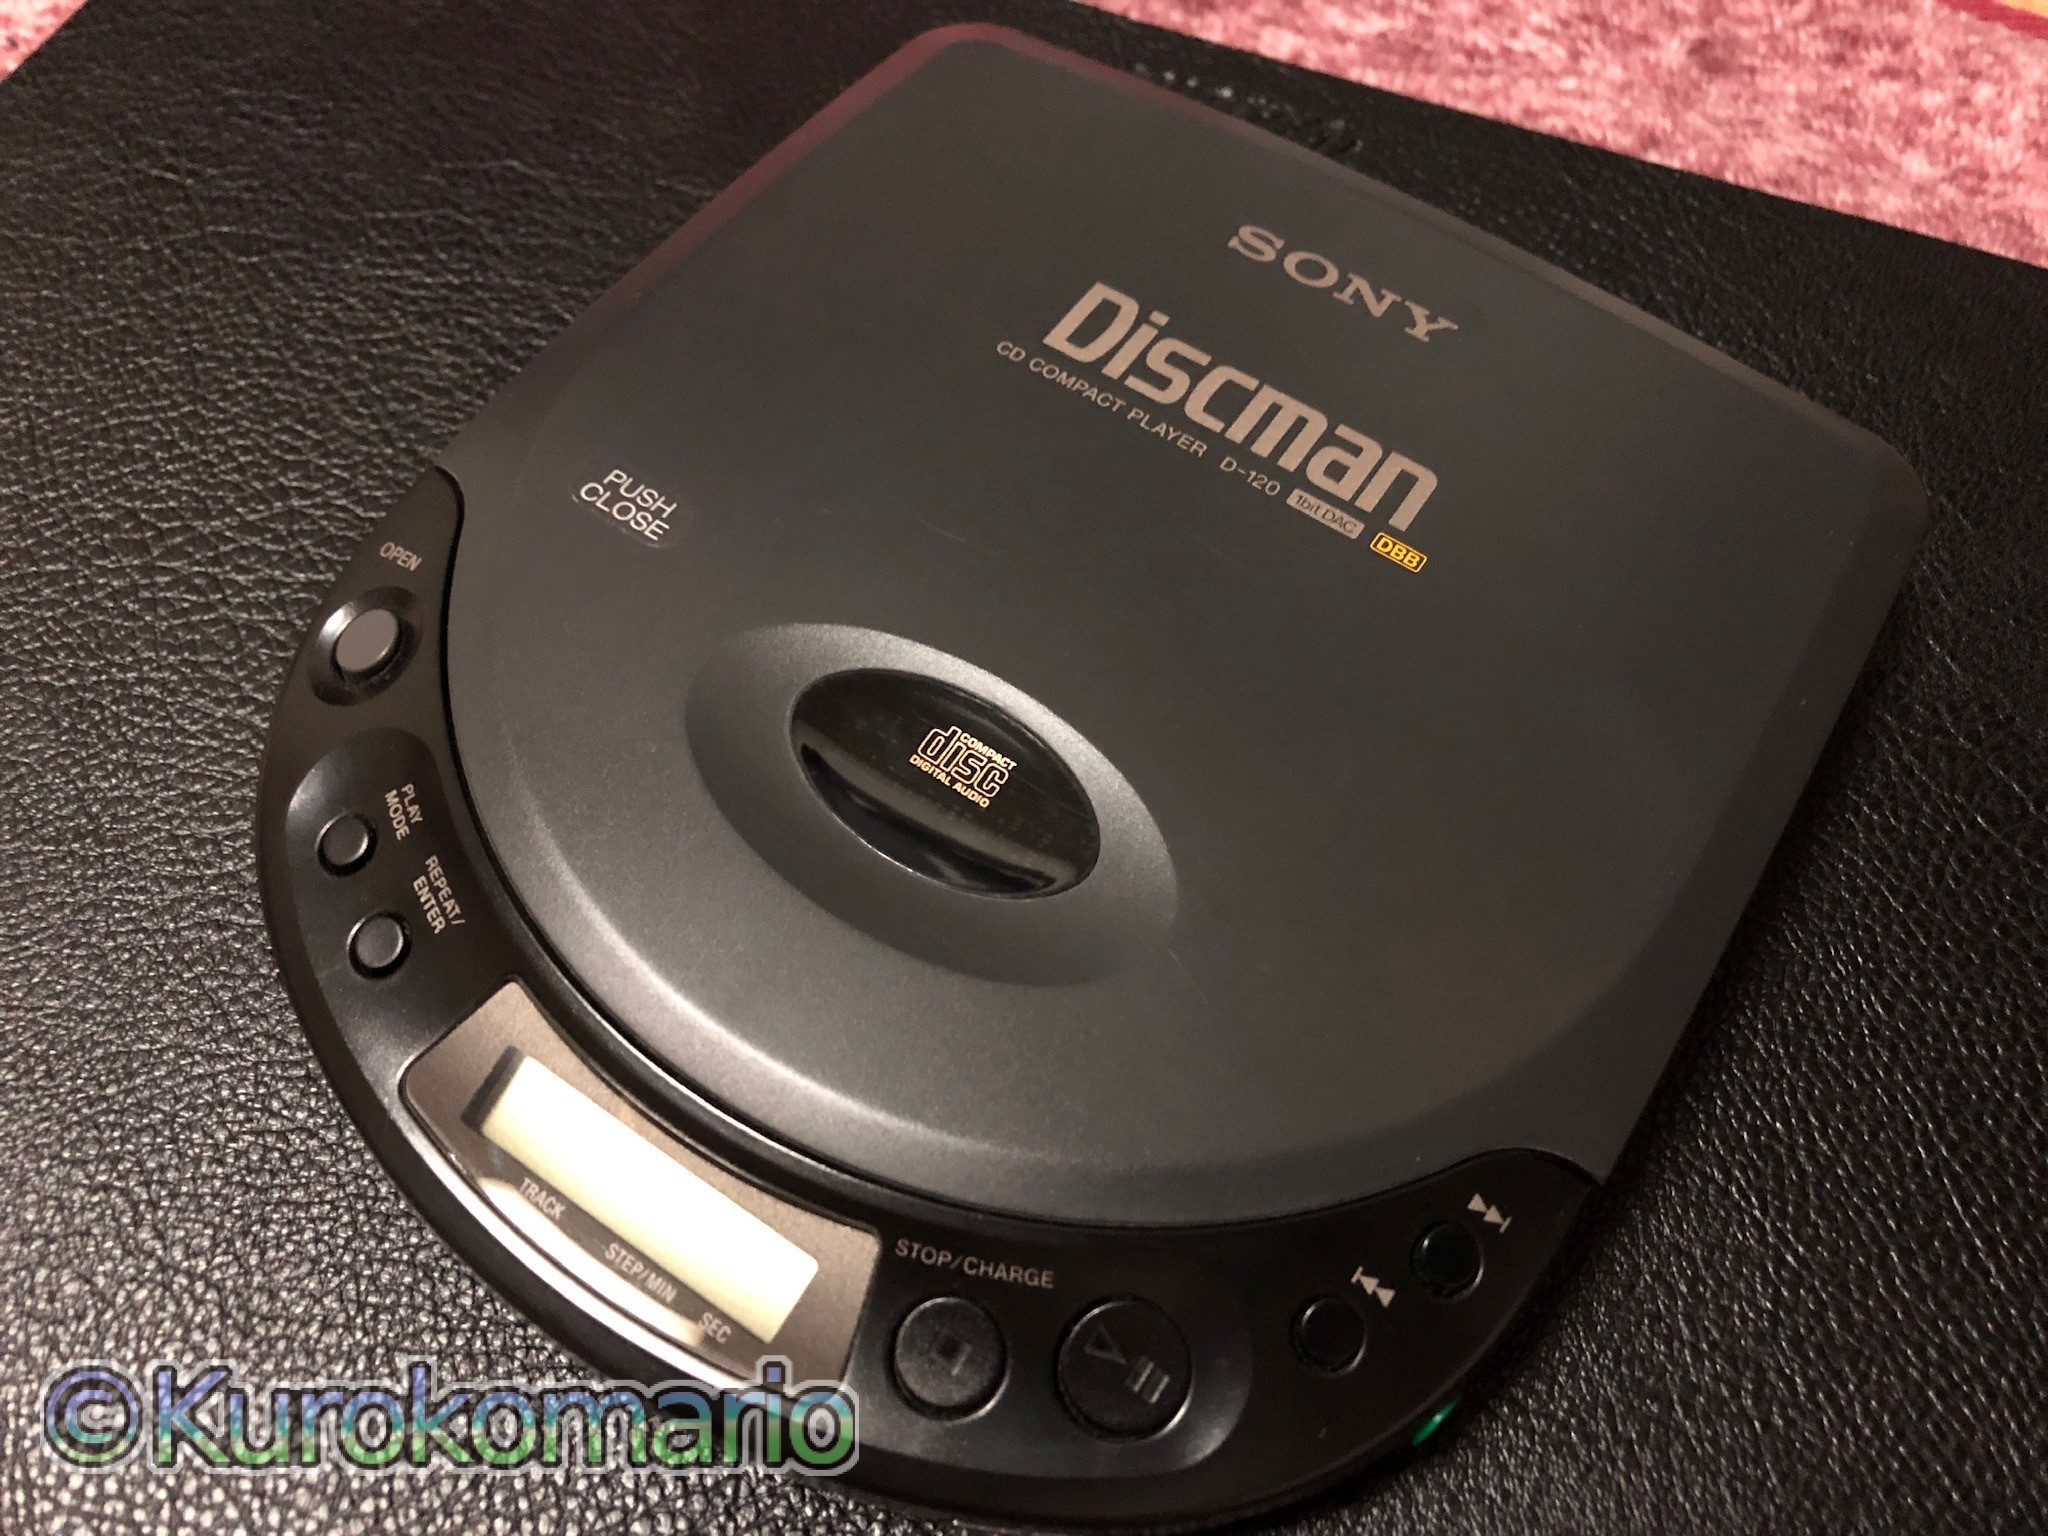 You are currently viewing 古物紹介：SONY Discman D-120 (ポータブルCDプレーヤー)